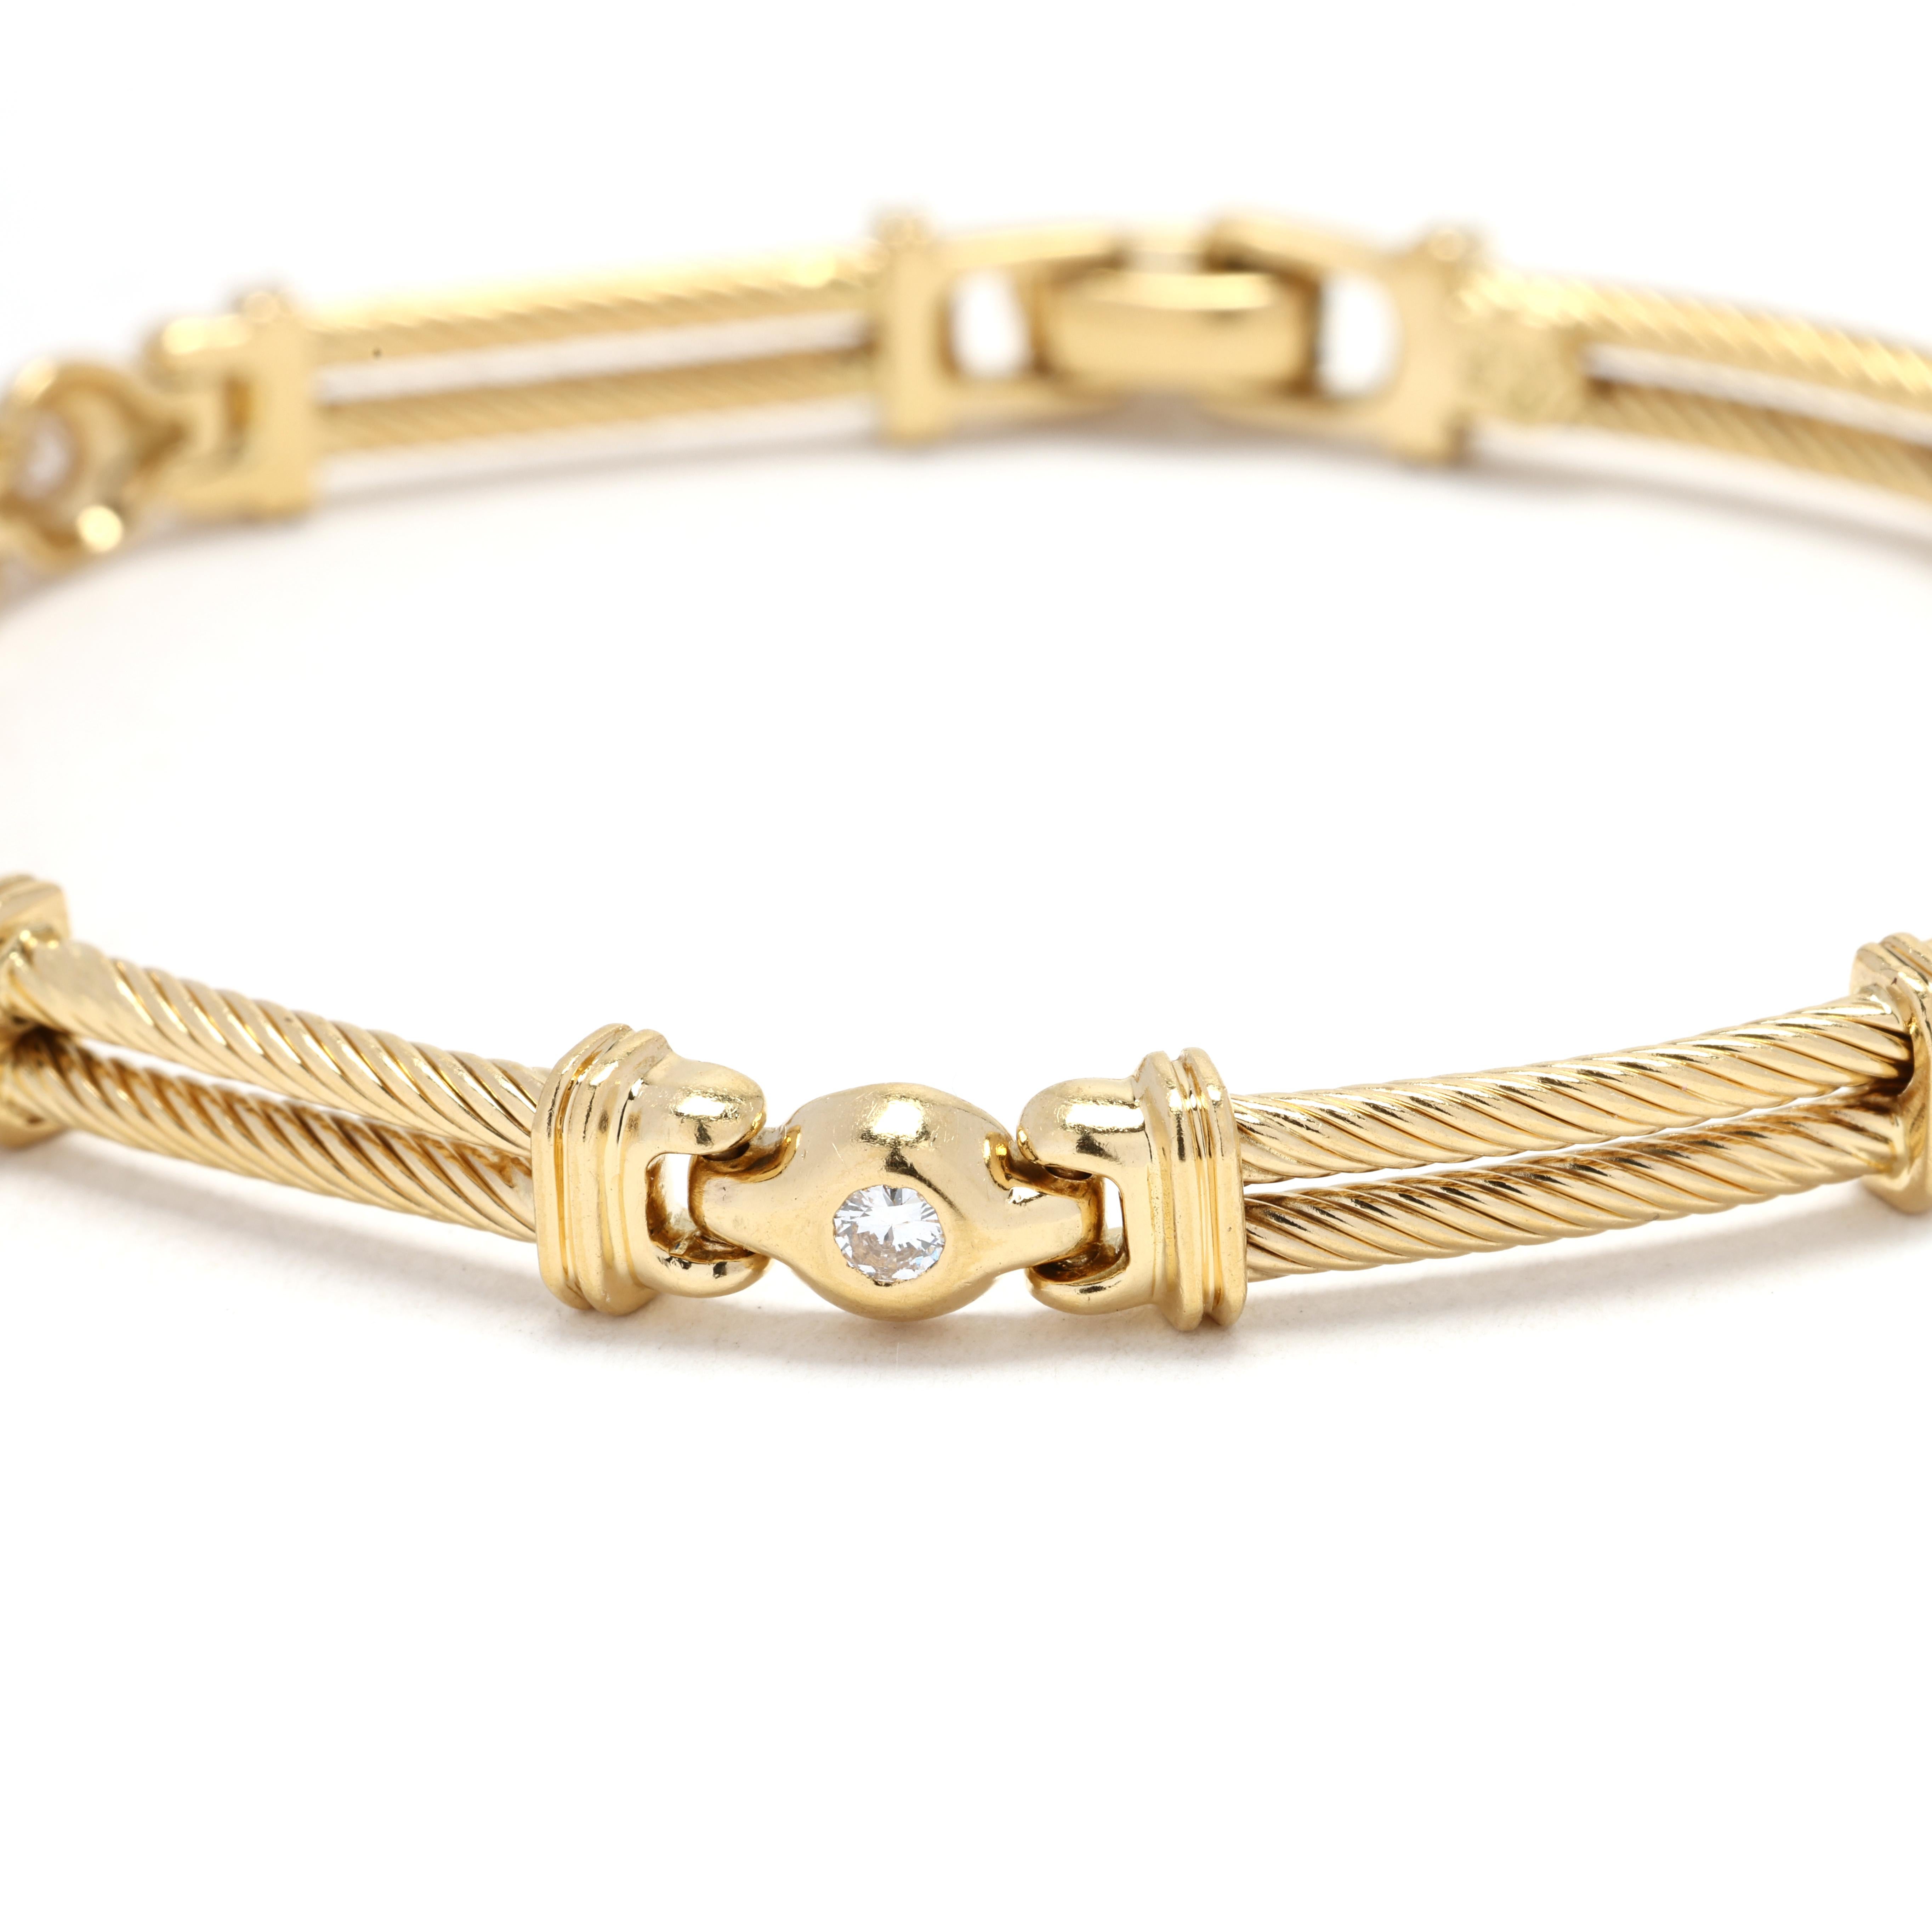 This 0.30ctw Diamond Line Bracelet in 18k Yellow Gold is a stunning piece of jewelry that exudes elegance and luxury. Crafted in 18k yellow gold, this bracelet features a row of brilliant round-cut diamonds with a total carat weight of 0.30ctw. The